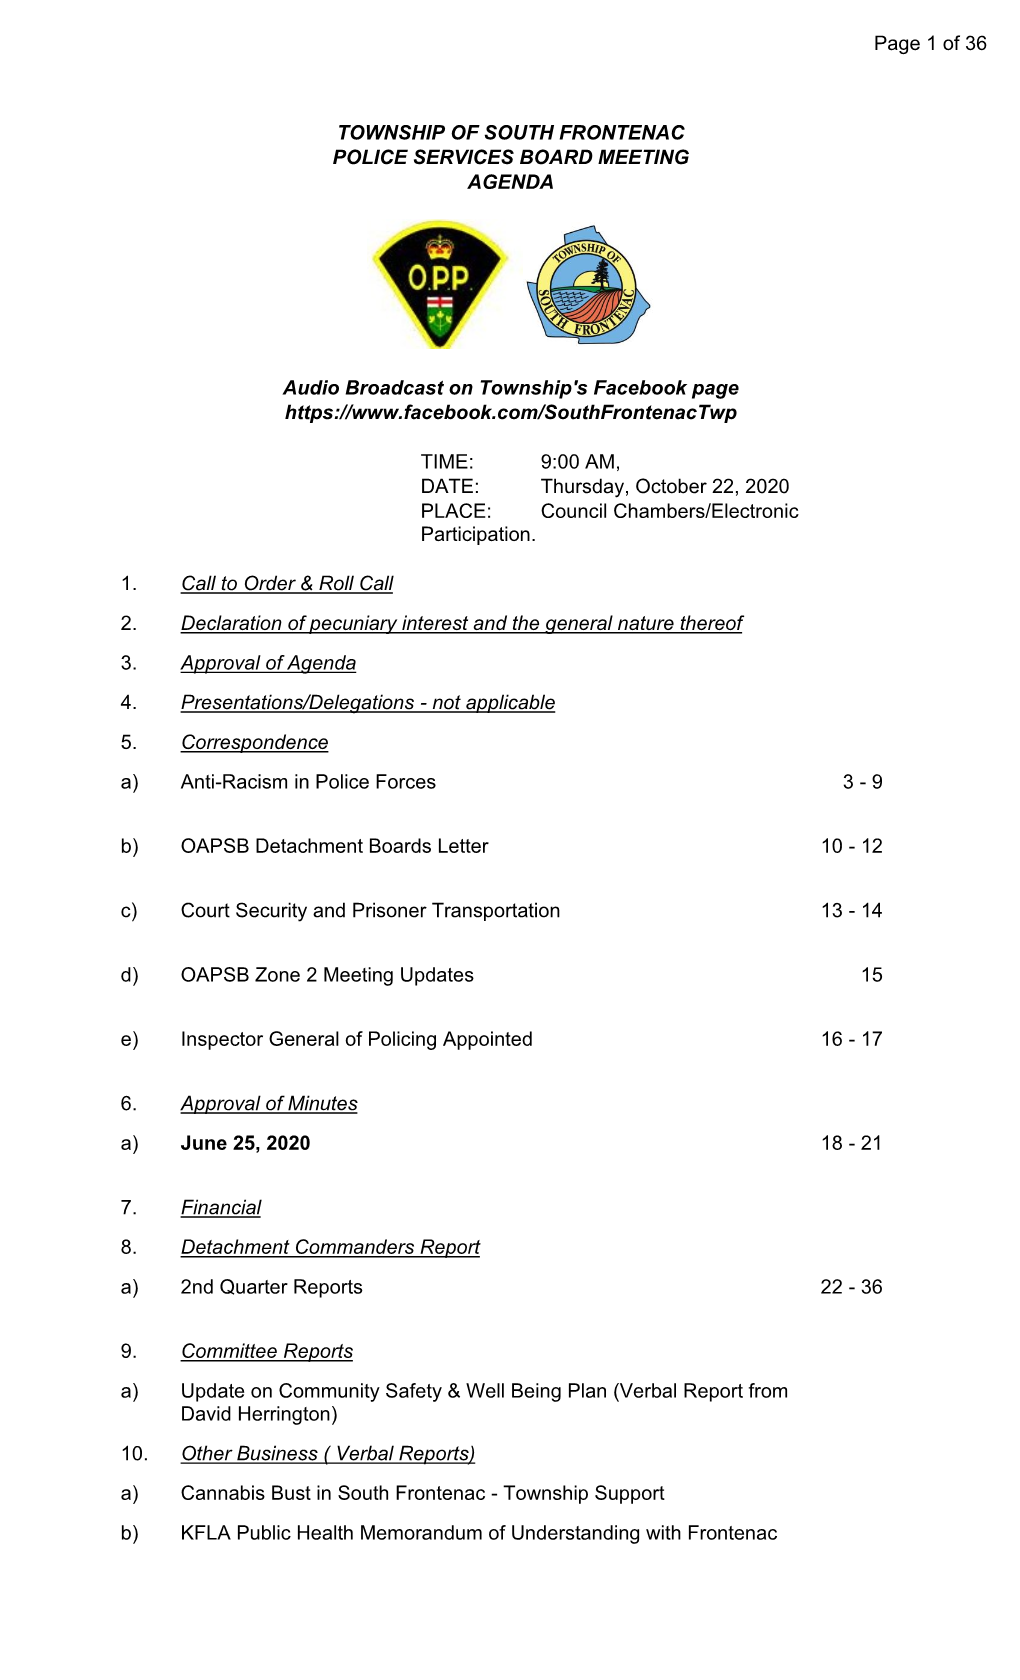 Police Services Board Meeting Agenda